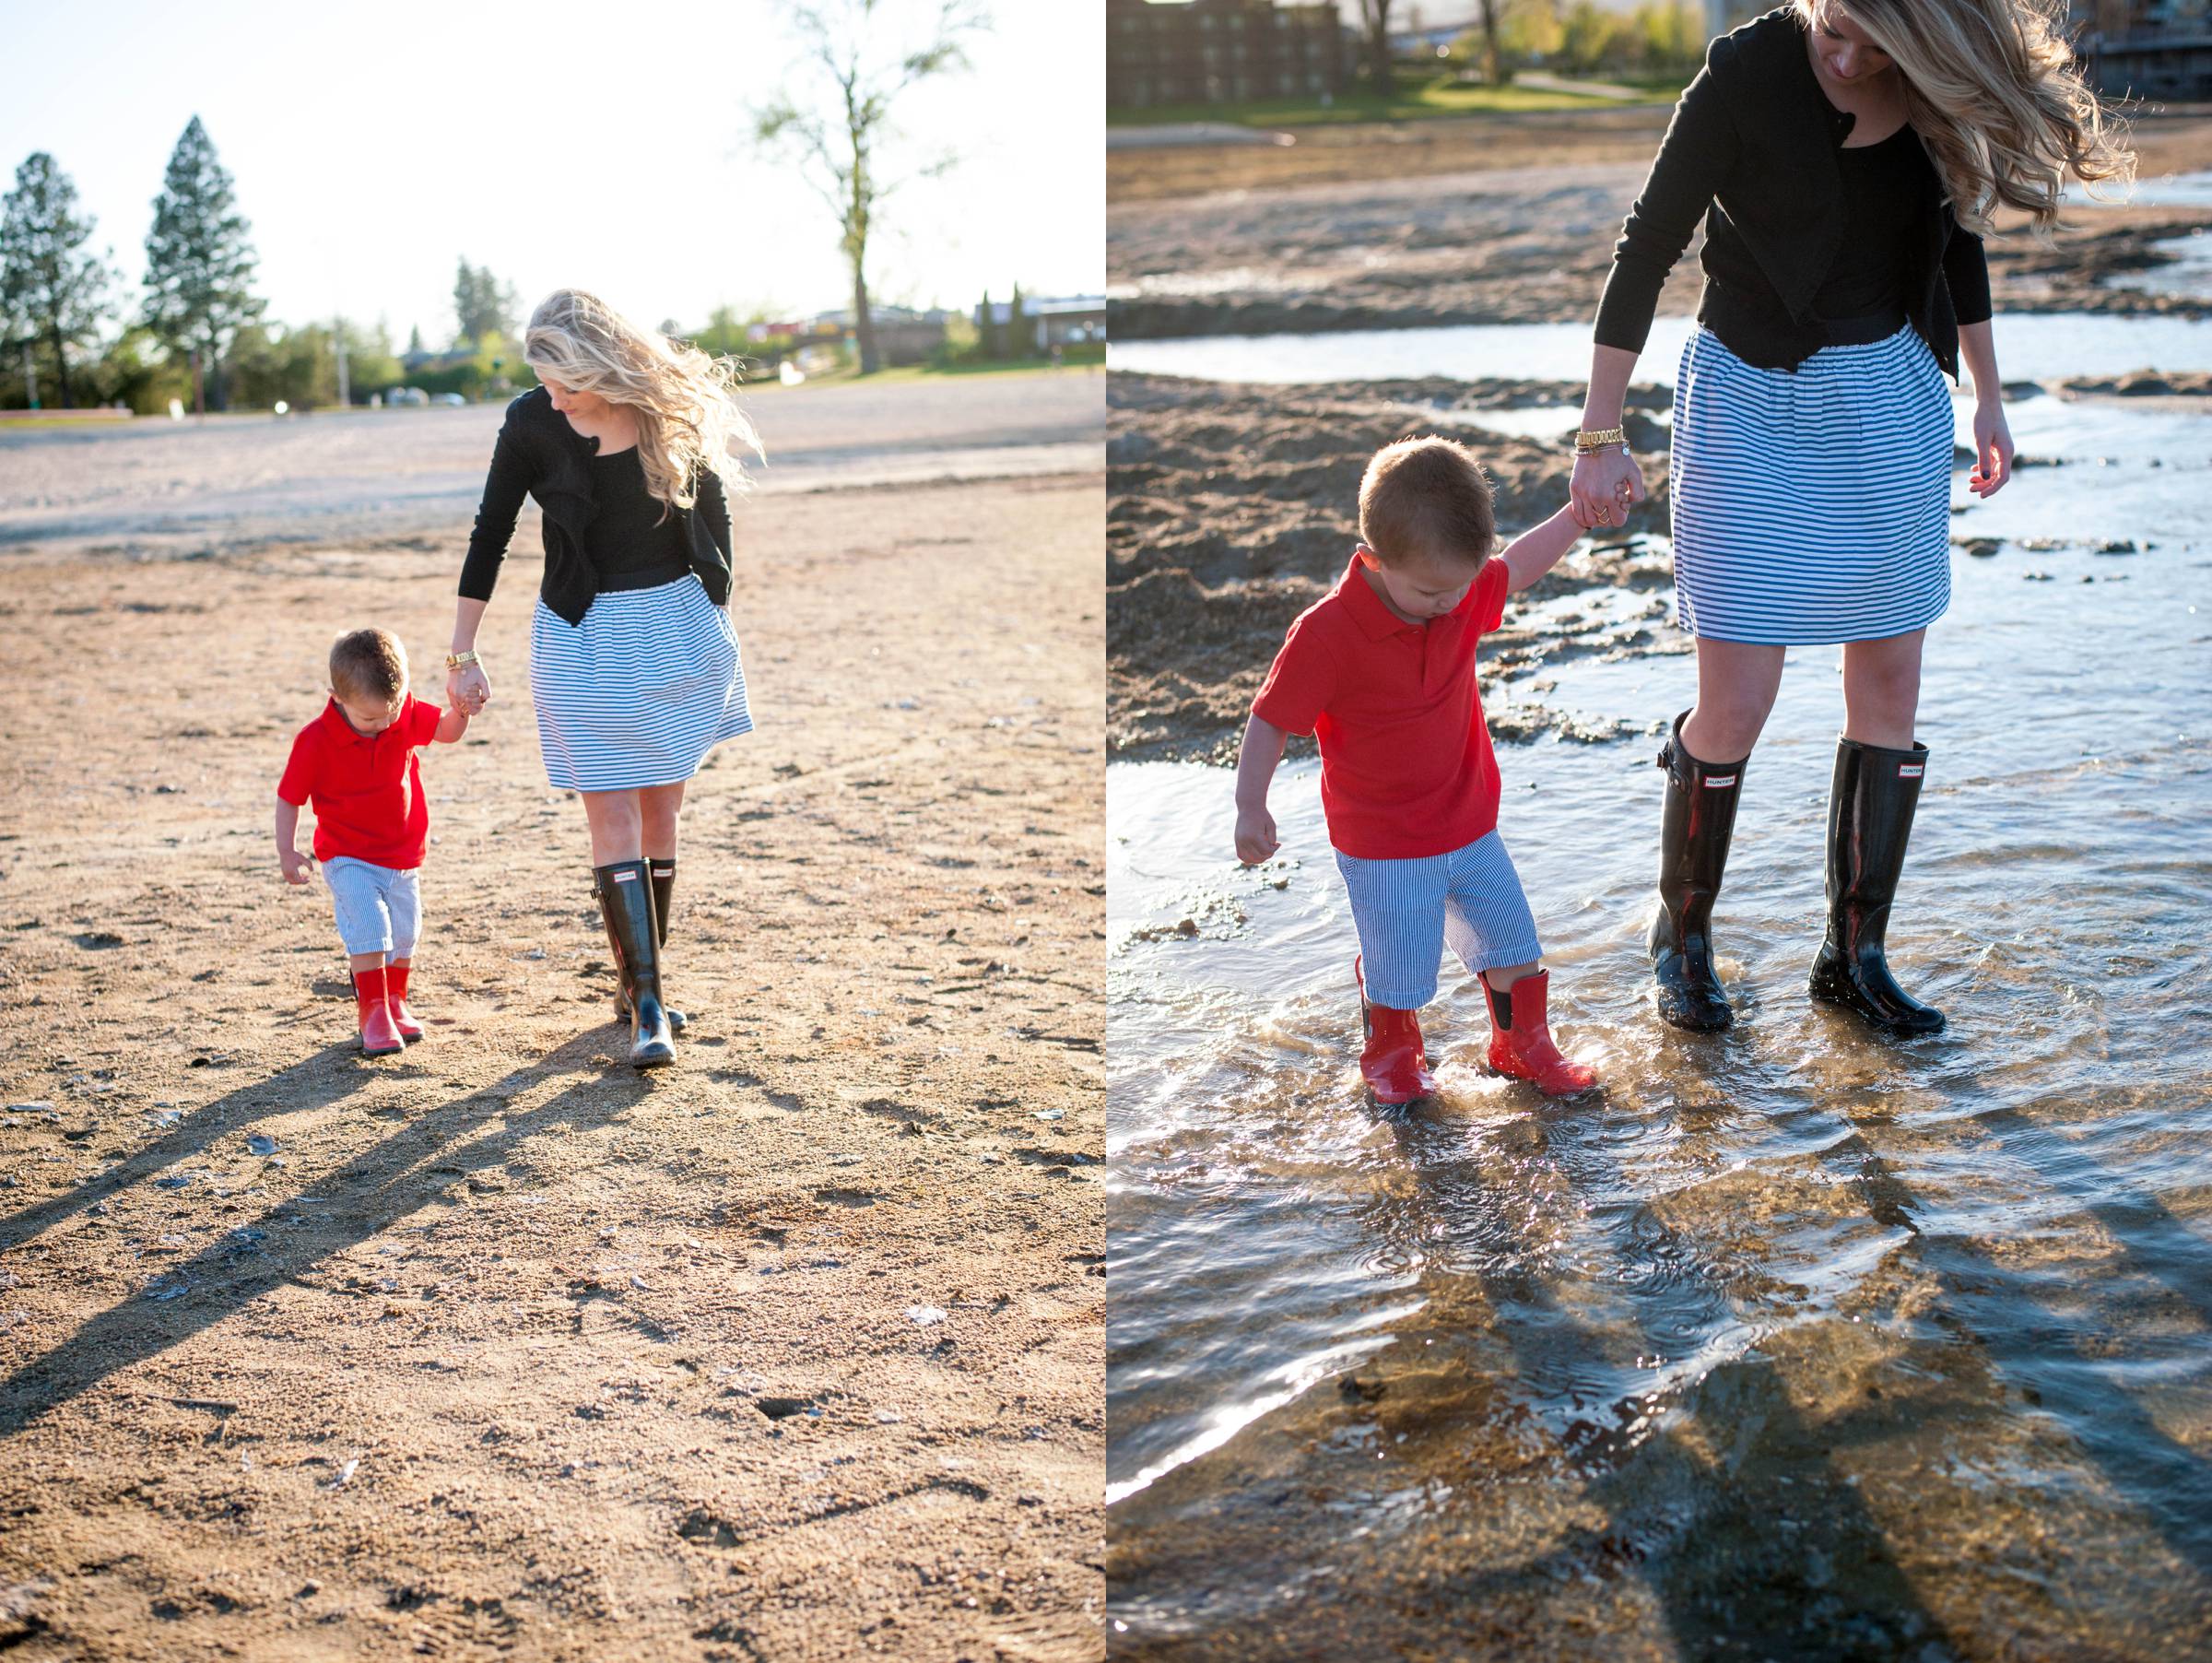 Janel-Gion-Photography-and-Design-Mommy-and-Me-Summer-Photo-Session-Sandpoint-Idaho_0009.jpg